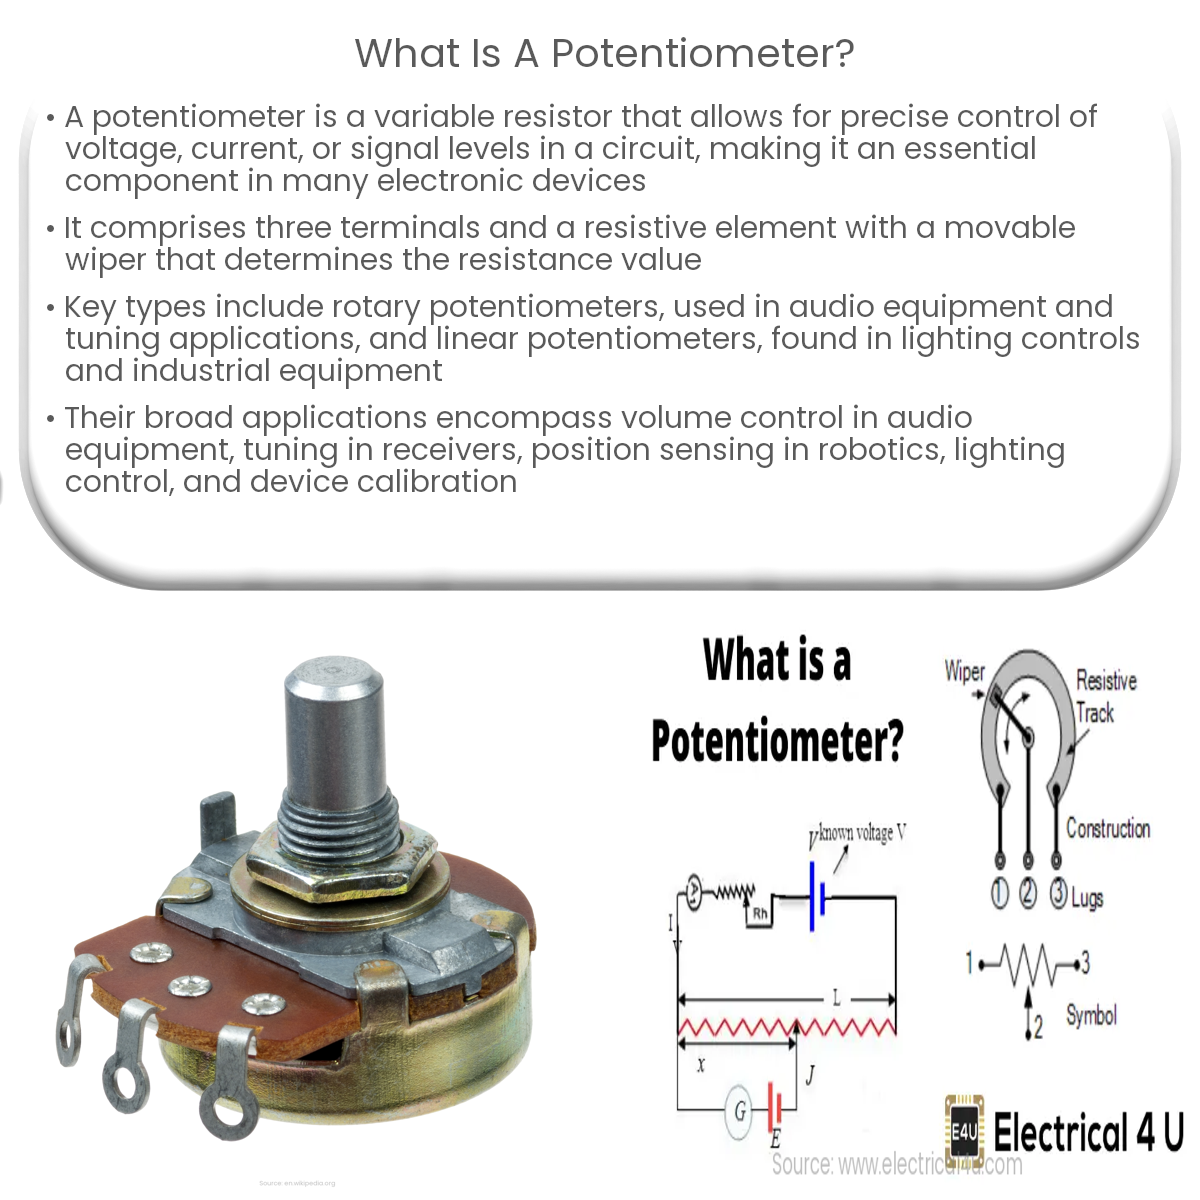 What is a potentiometer?